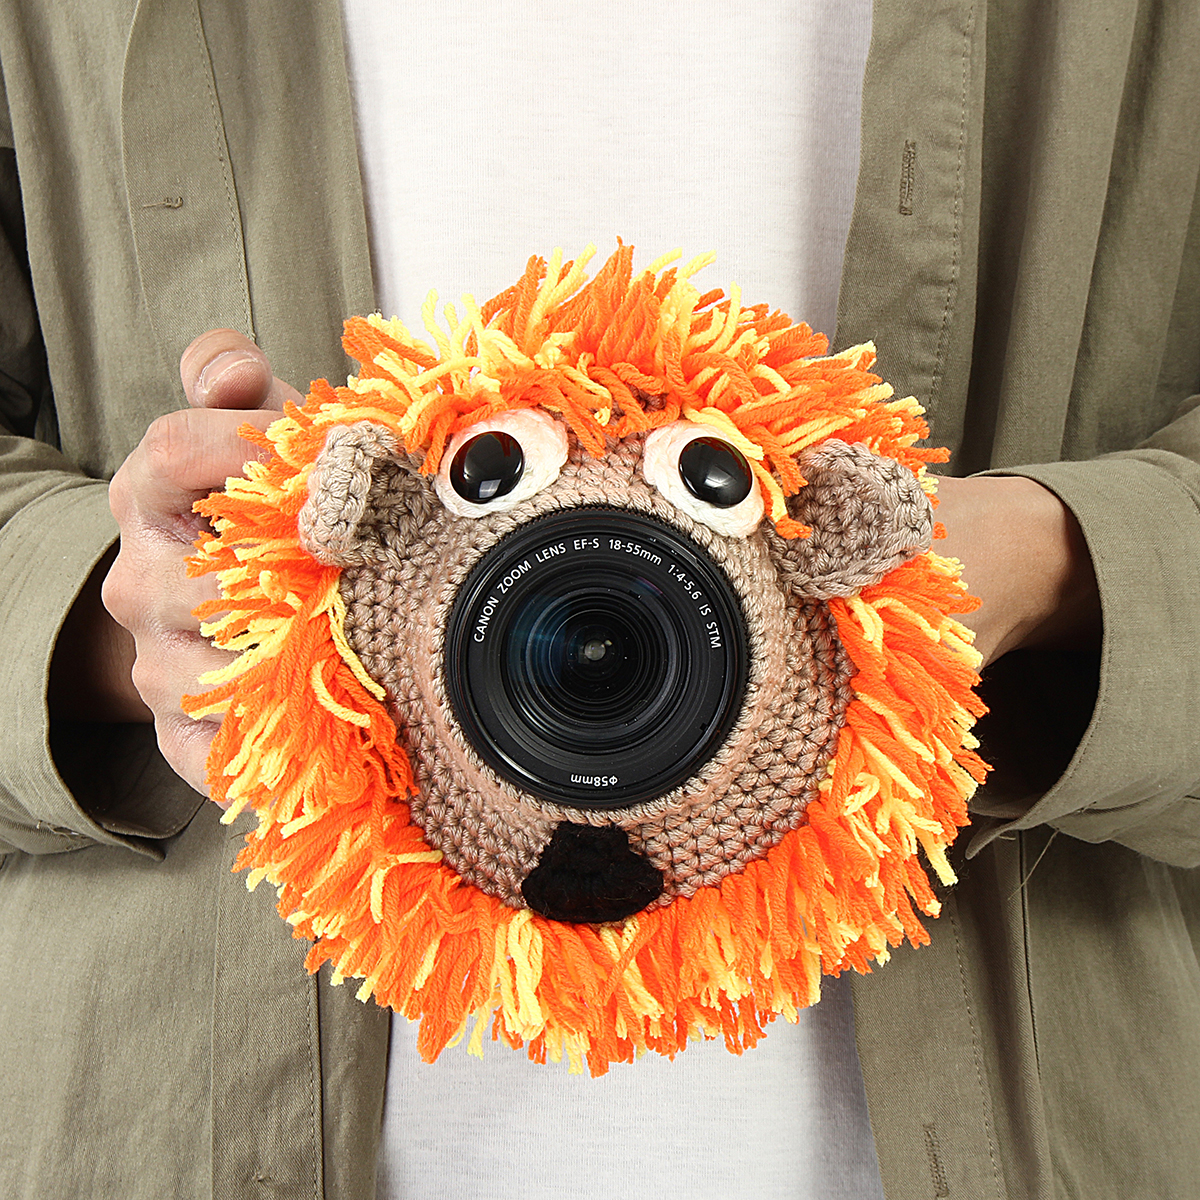 Hand-knitted-Wool-Decor-Case-For-Camera-Lens-Decorative-Photo-Guide-Doll-Toys-For-Kids-1457648-10